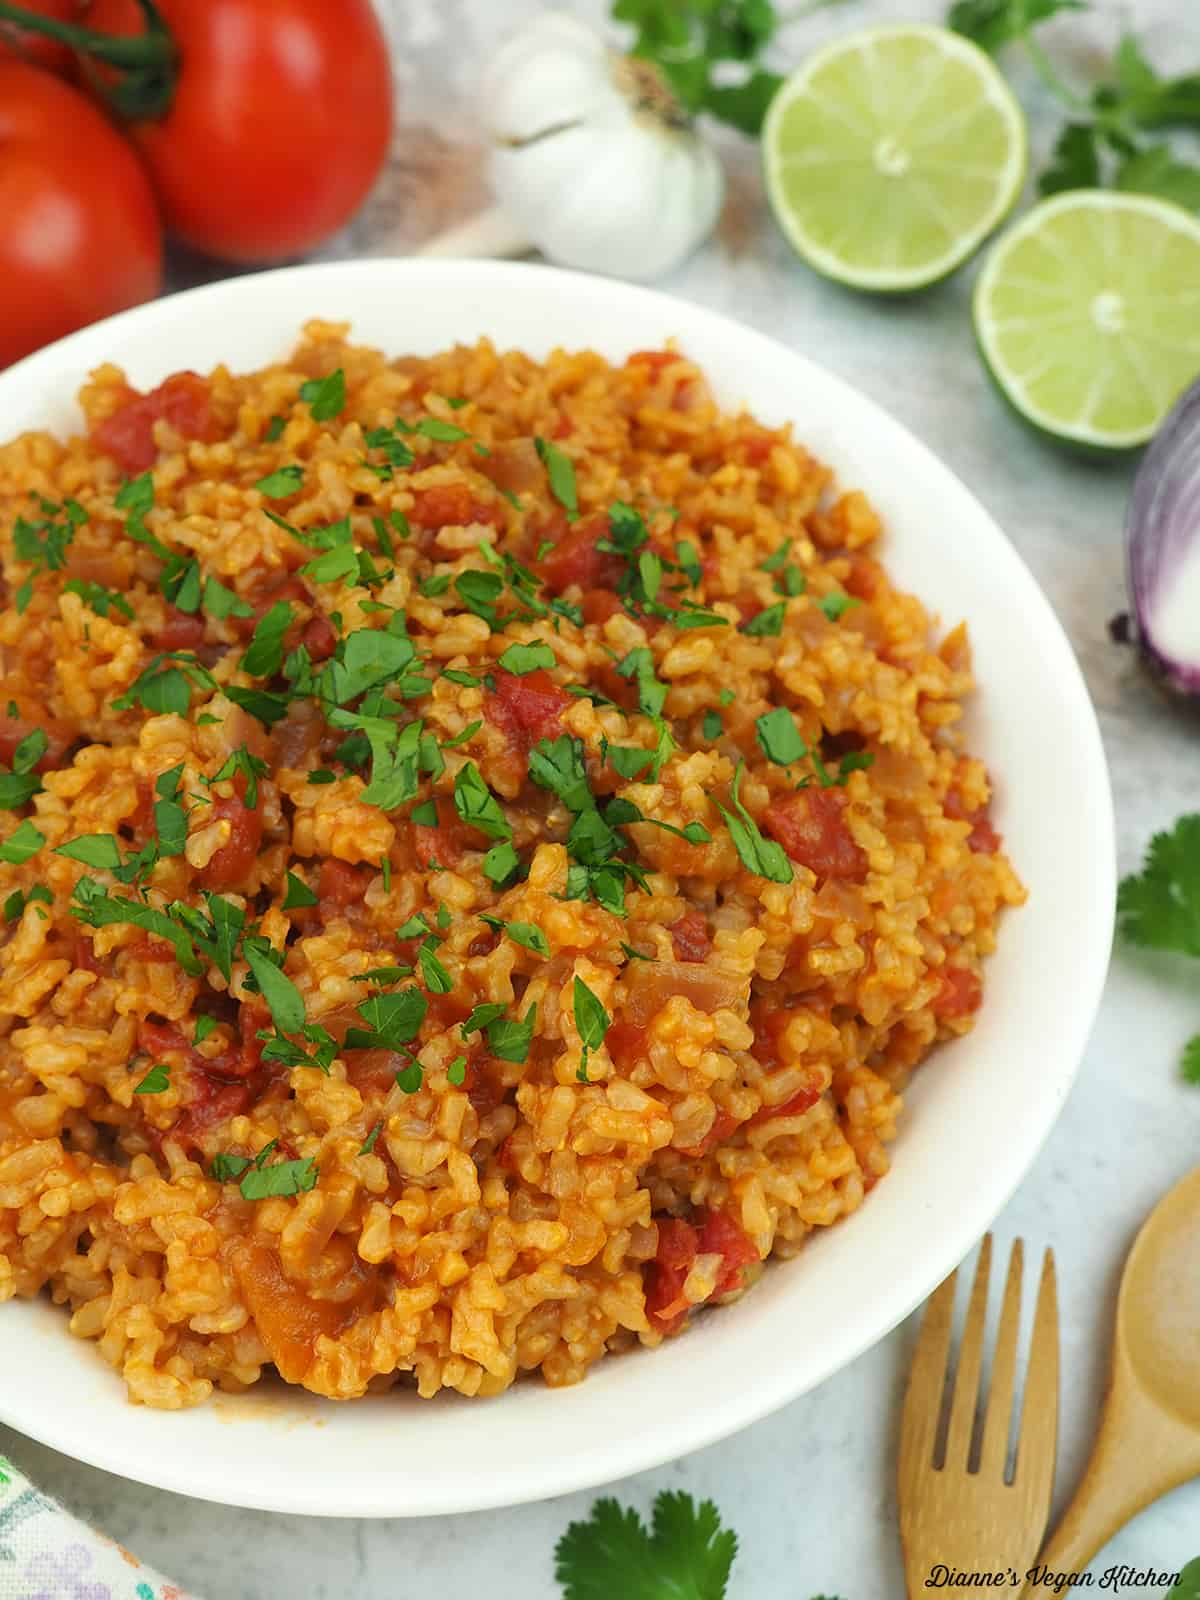 bowl of Spanish rice with tomatoes, limes, garlic, and onion